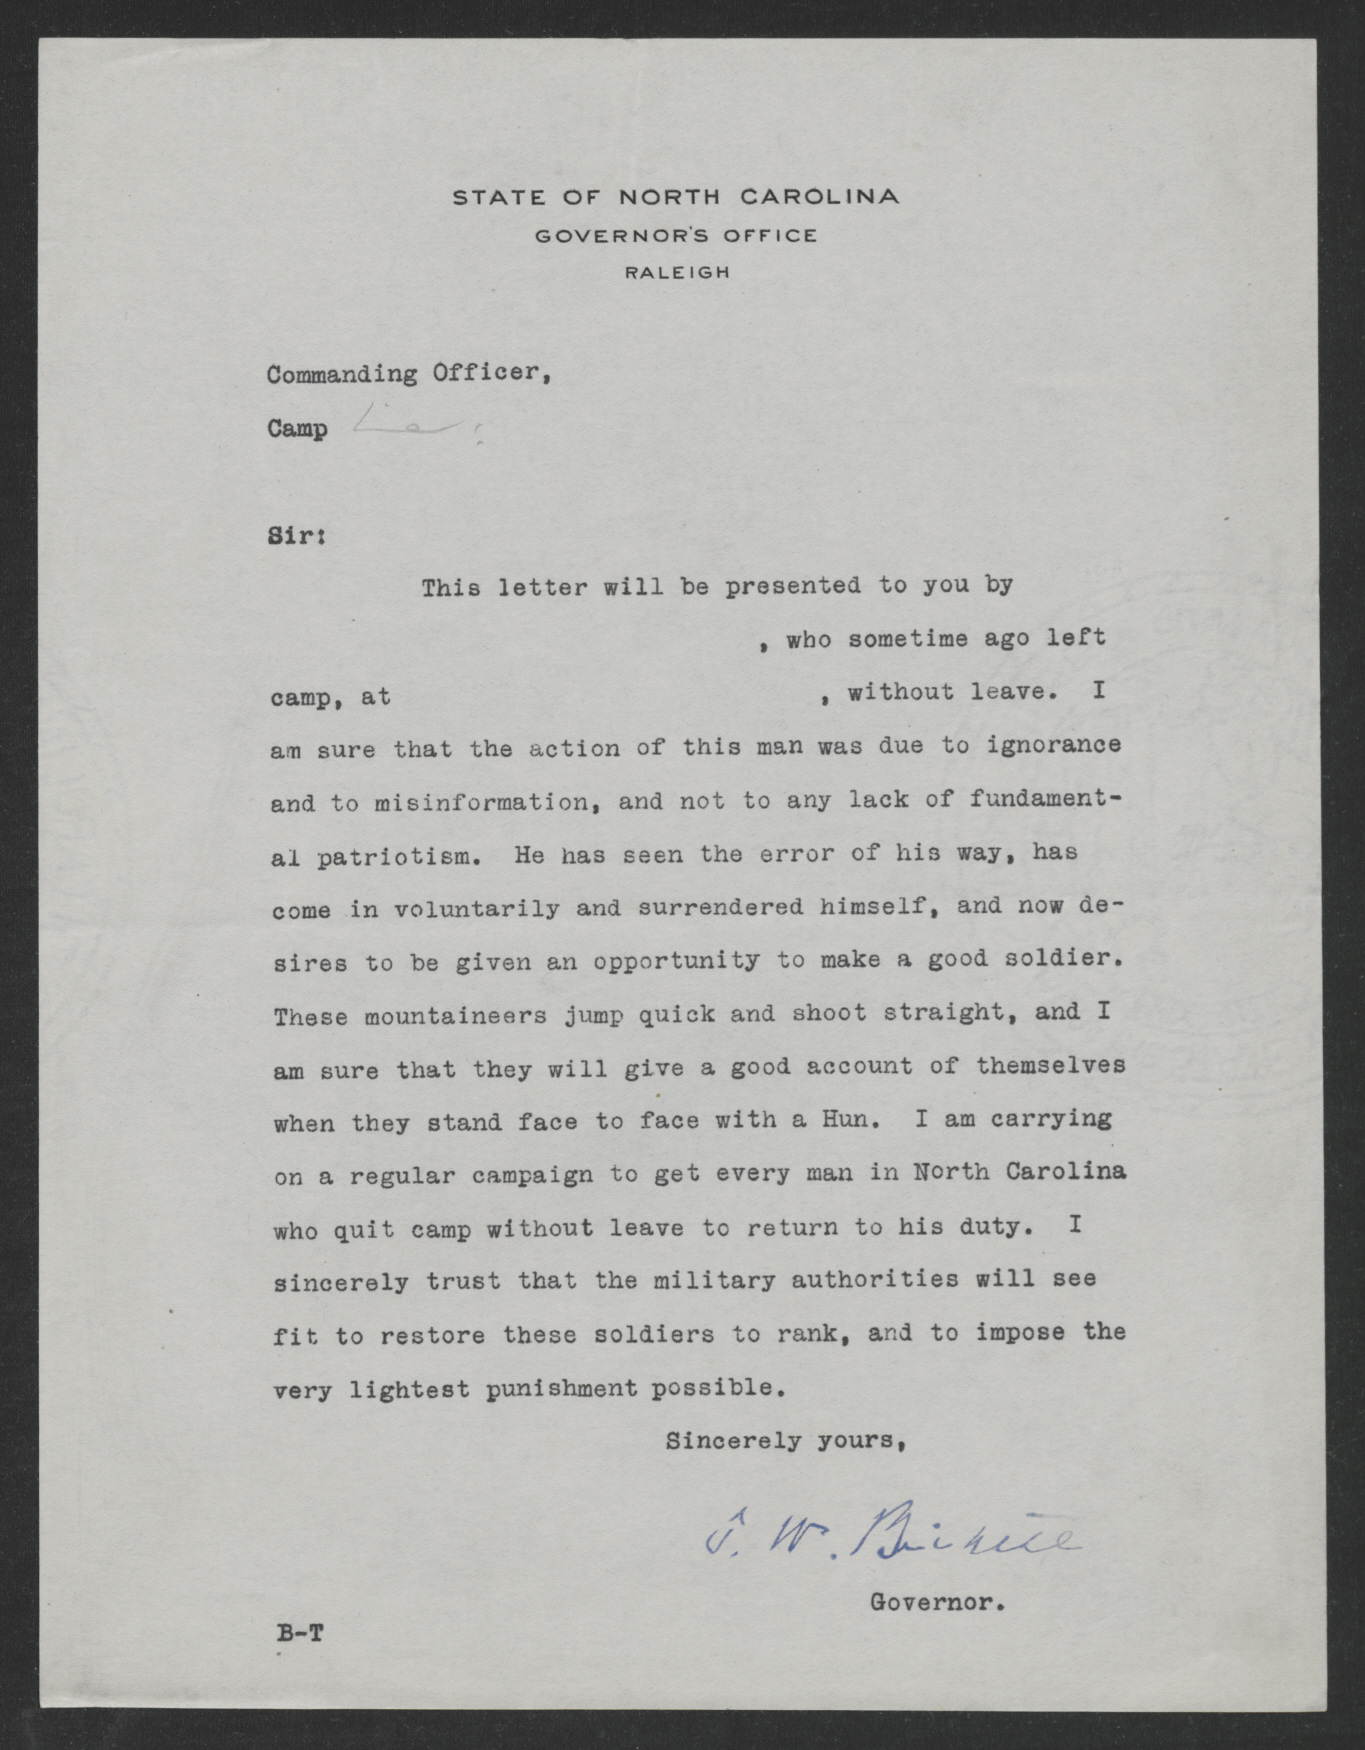 Form letter from Thomas W. Bickett to the Commanding Officers of Deserters, Circa 1918